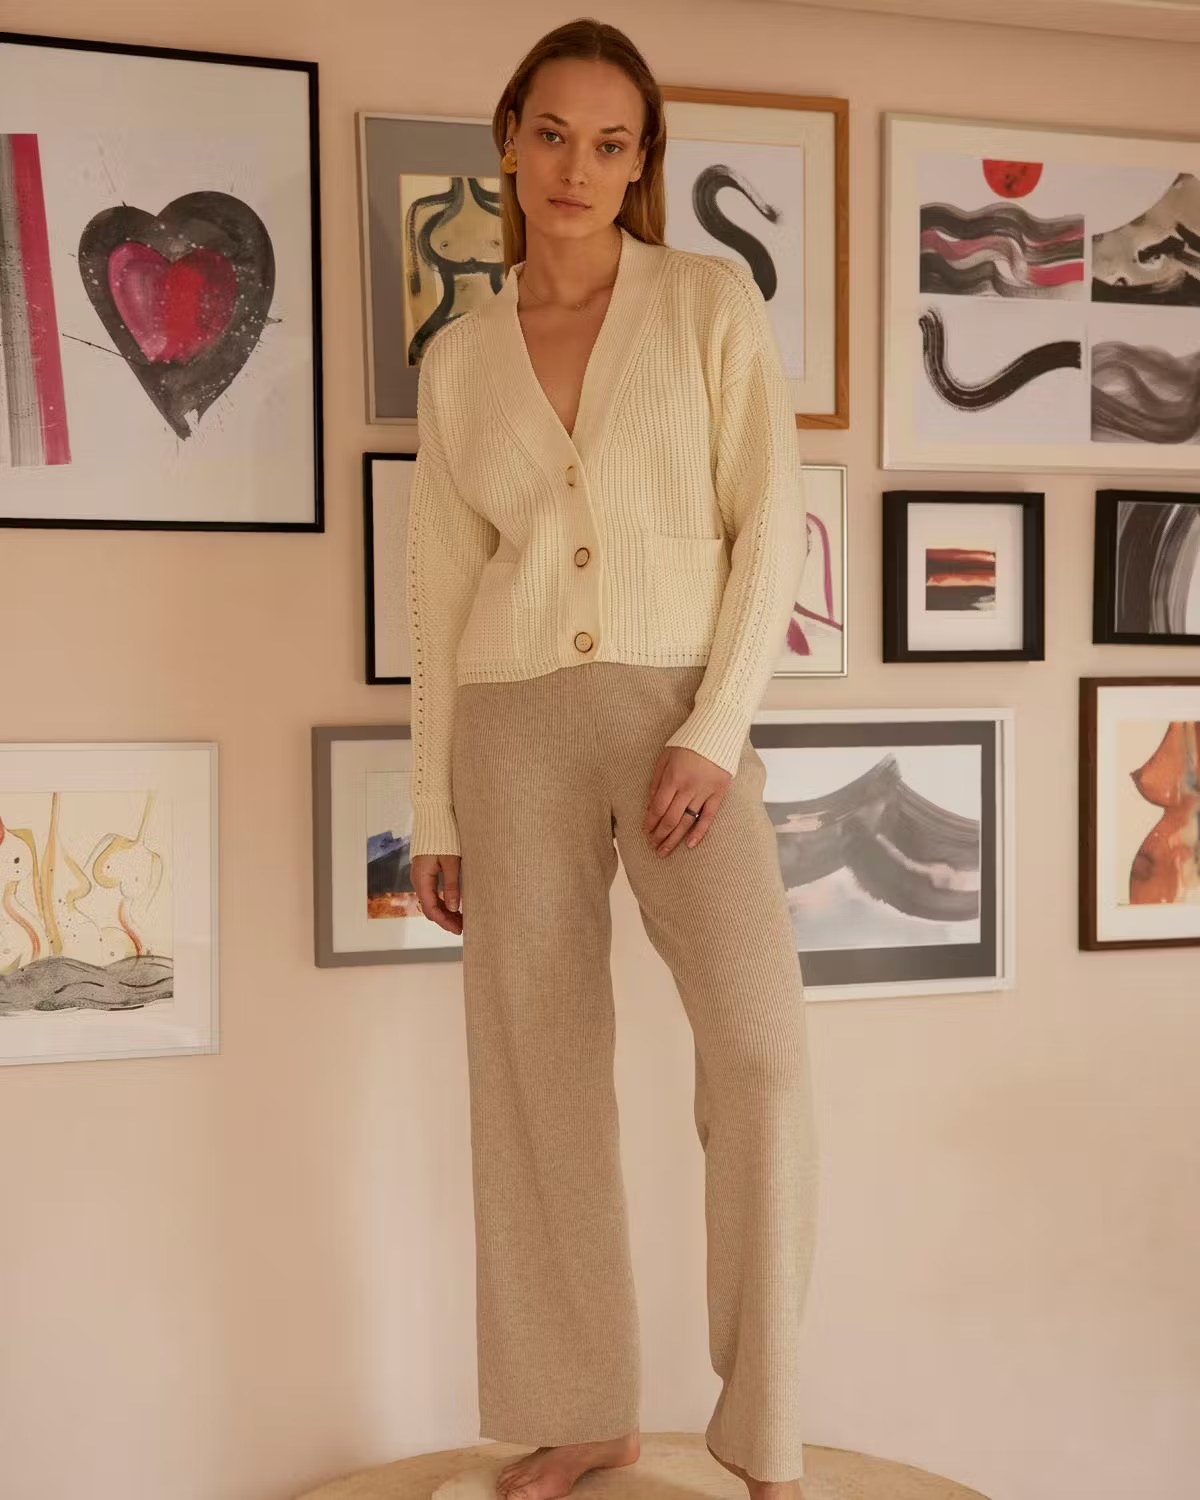 a model wearing the cardigan and pants